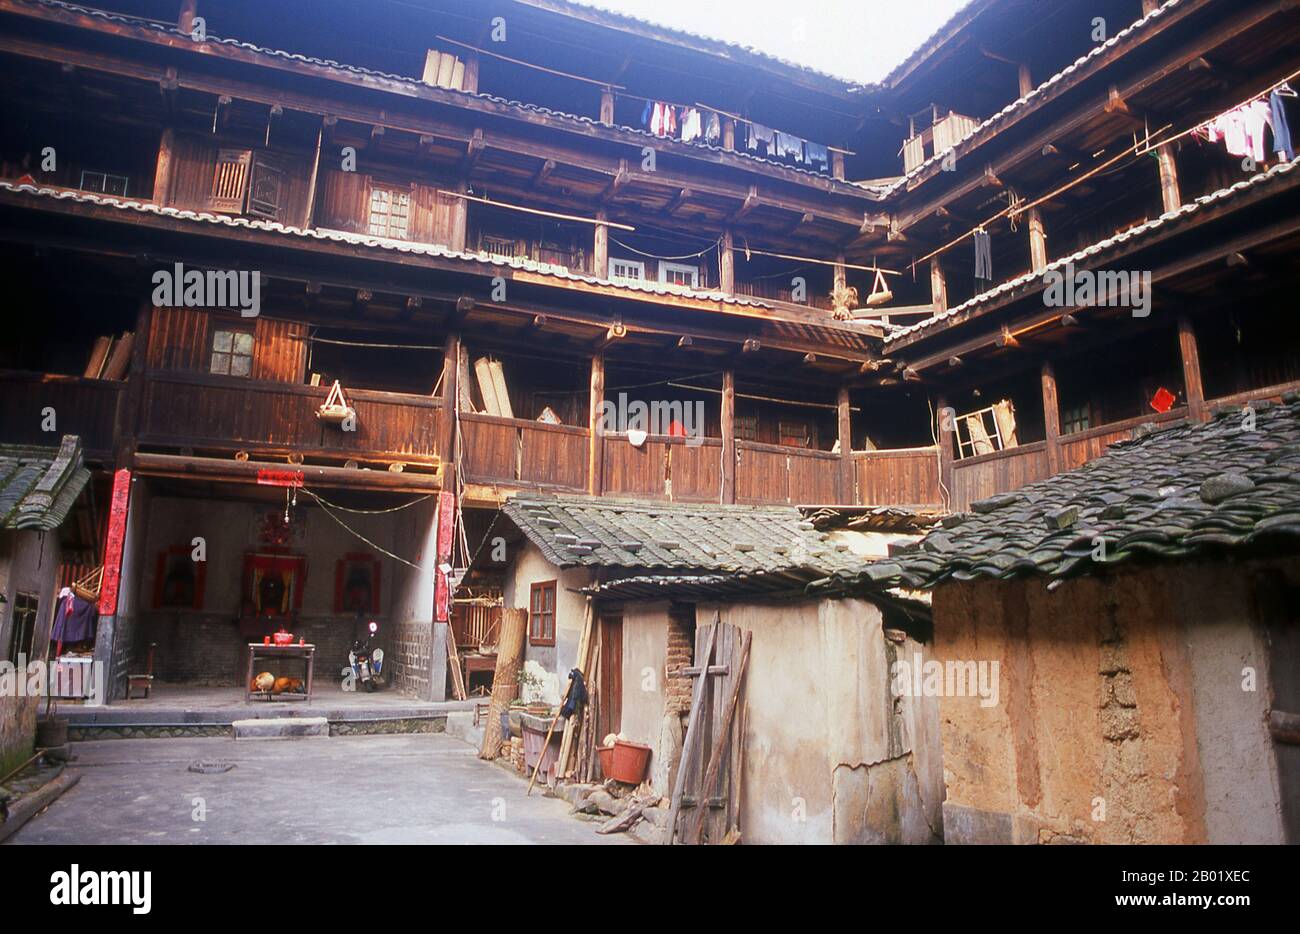 The Hakka (Kejia in Mandarin; literally 'guest people') are Han Chinese who speak the Hakka language. Their distinctive earthen houses or tulou can be found in the borderland counties where Guangdong, Jiangxi and Fujian provinces meet.  Communal entities, tulou are fortified against marauding bandits and generally made of compacted earth, bamboo, wood and stone. They contain many rooms on several storeys, so that several families can live together. The small, self-contained design is a common characteristic of Hakka dwellings (eg the Hakka walled villages at Kam Tin in Hong Kong’s New Territor Stock Photo